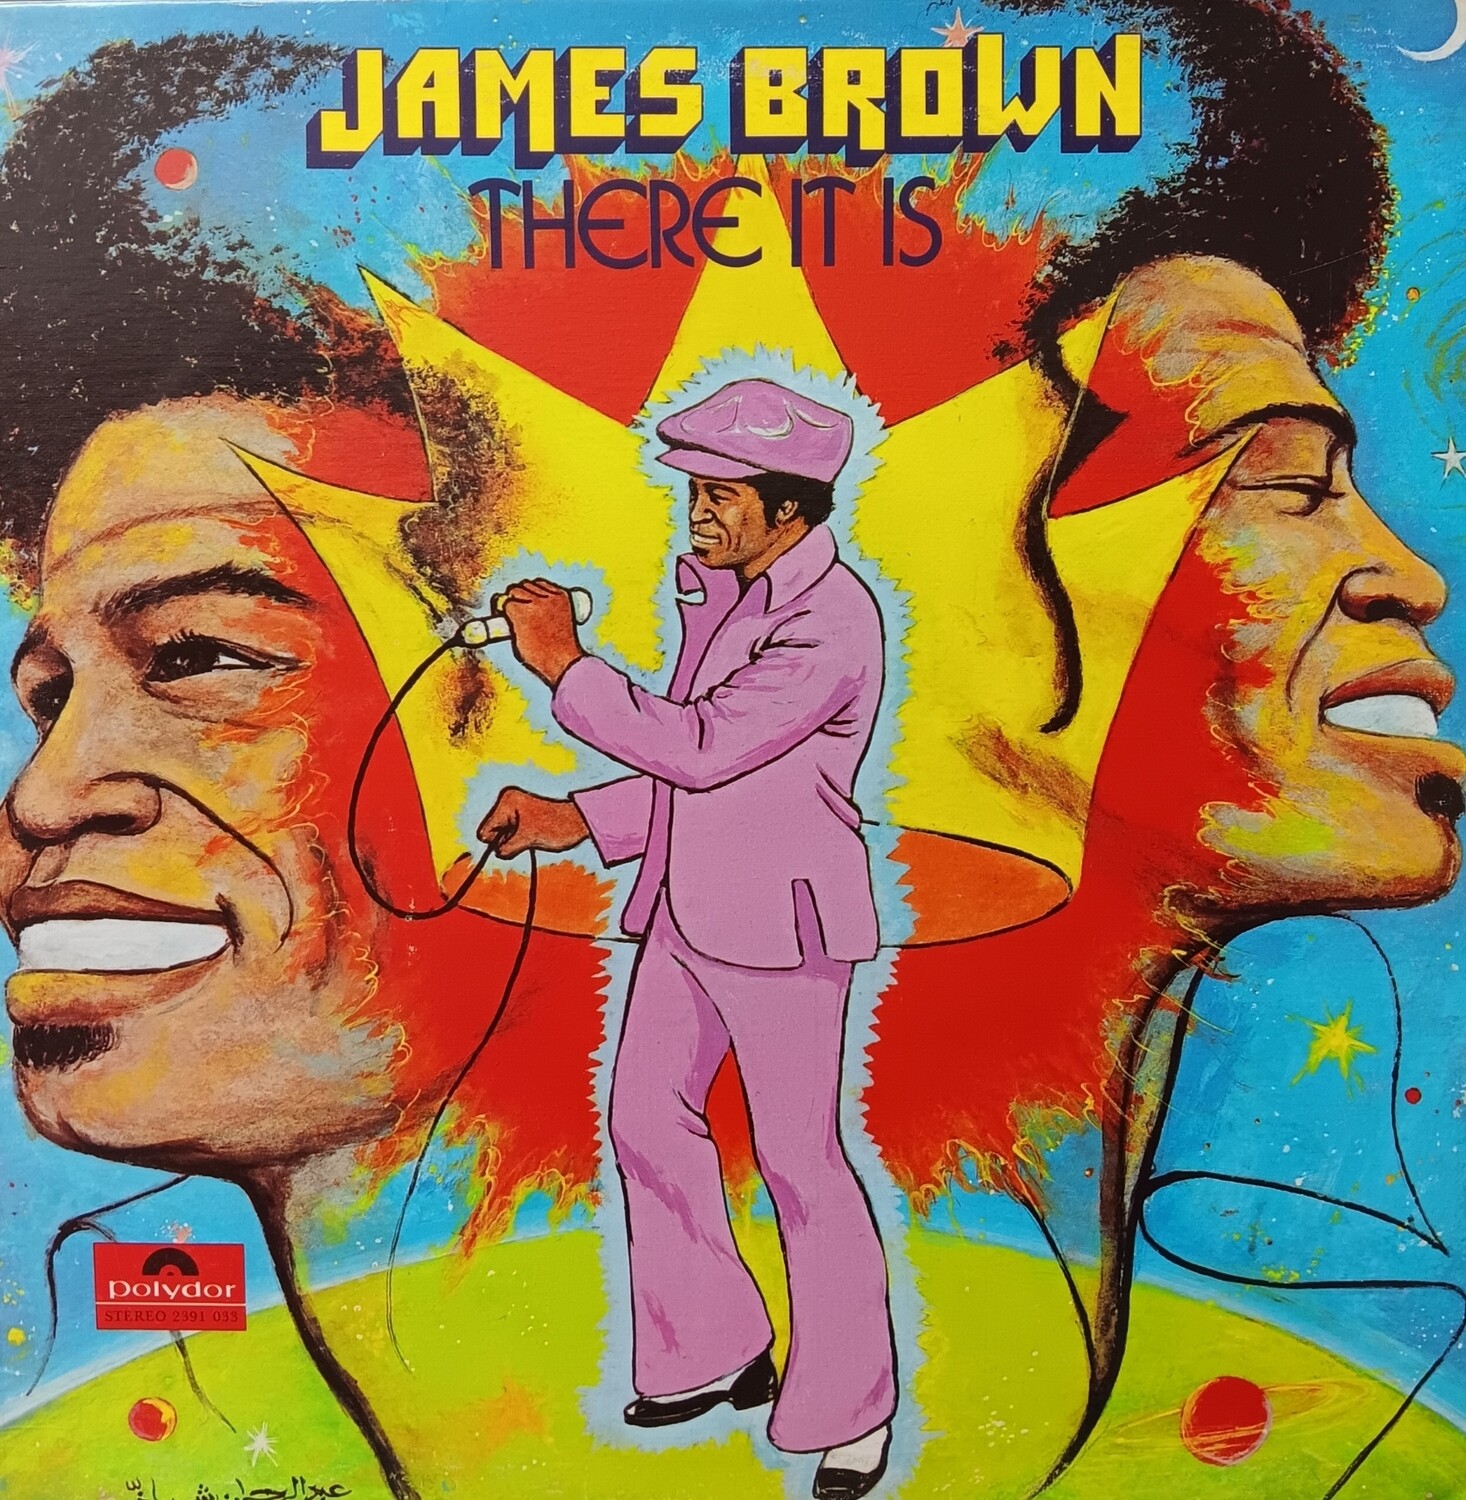 JAMES BROWN - There it is